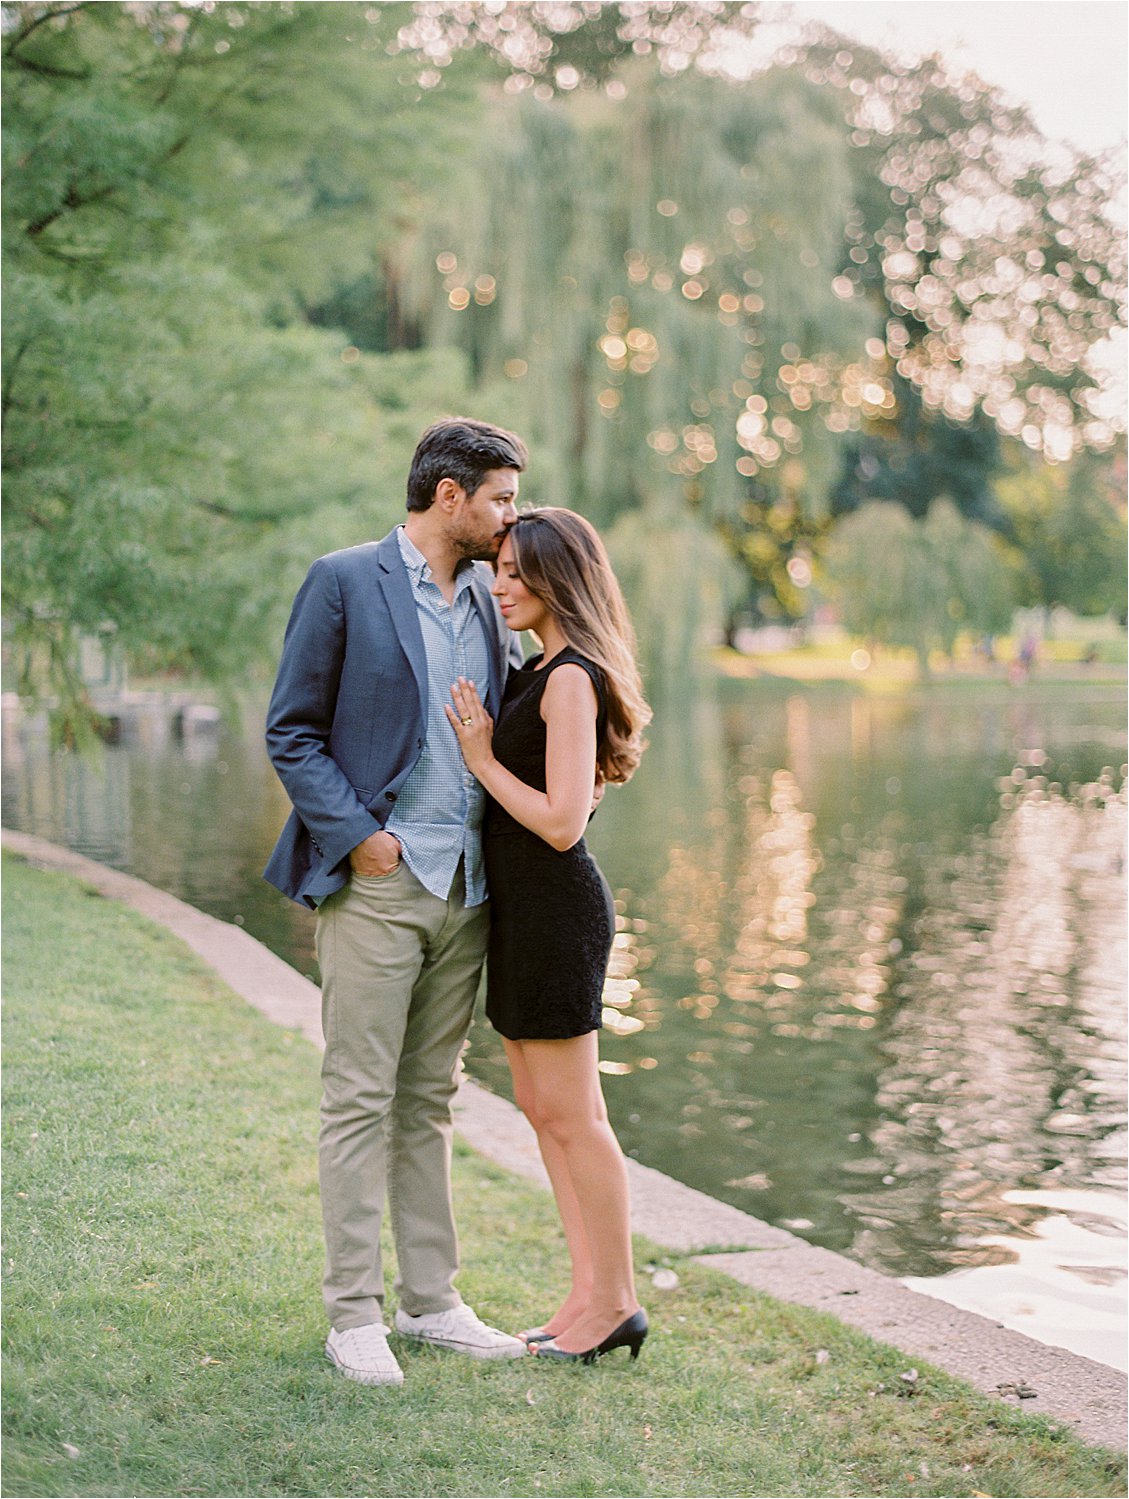 Summer Boston Public Garden Engagement Session by Boston and Destination Hybrid Film Wedding and Engagement Photographer, Renee Hollingshead